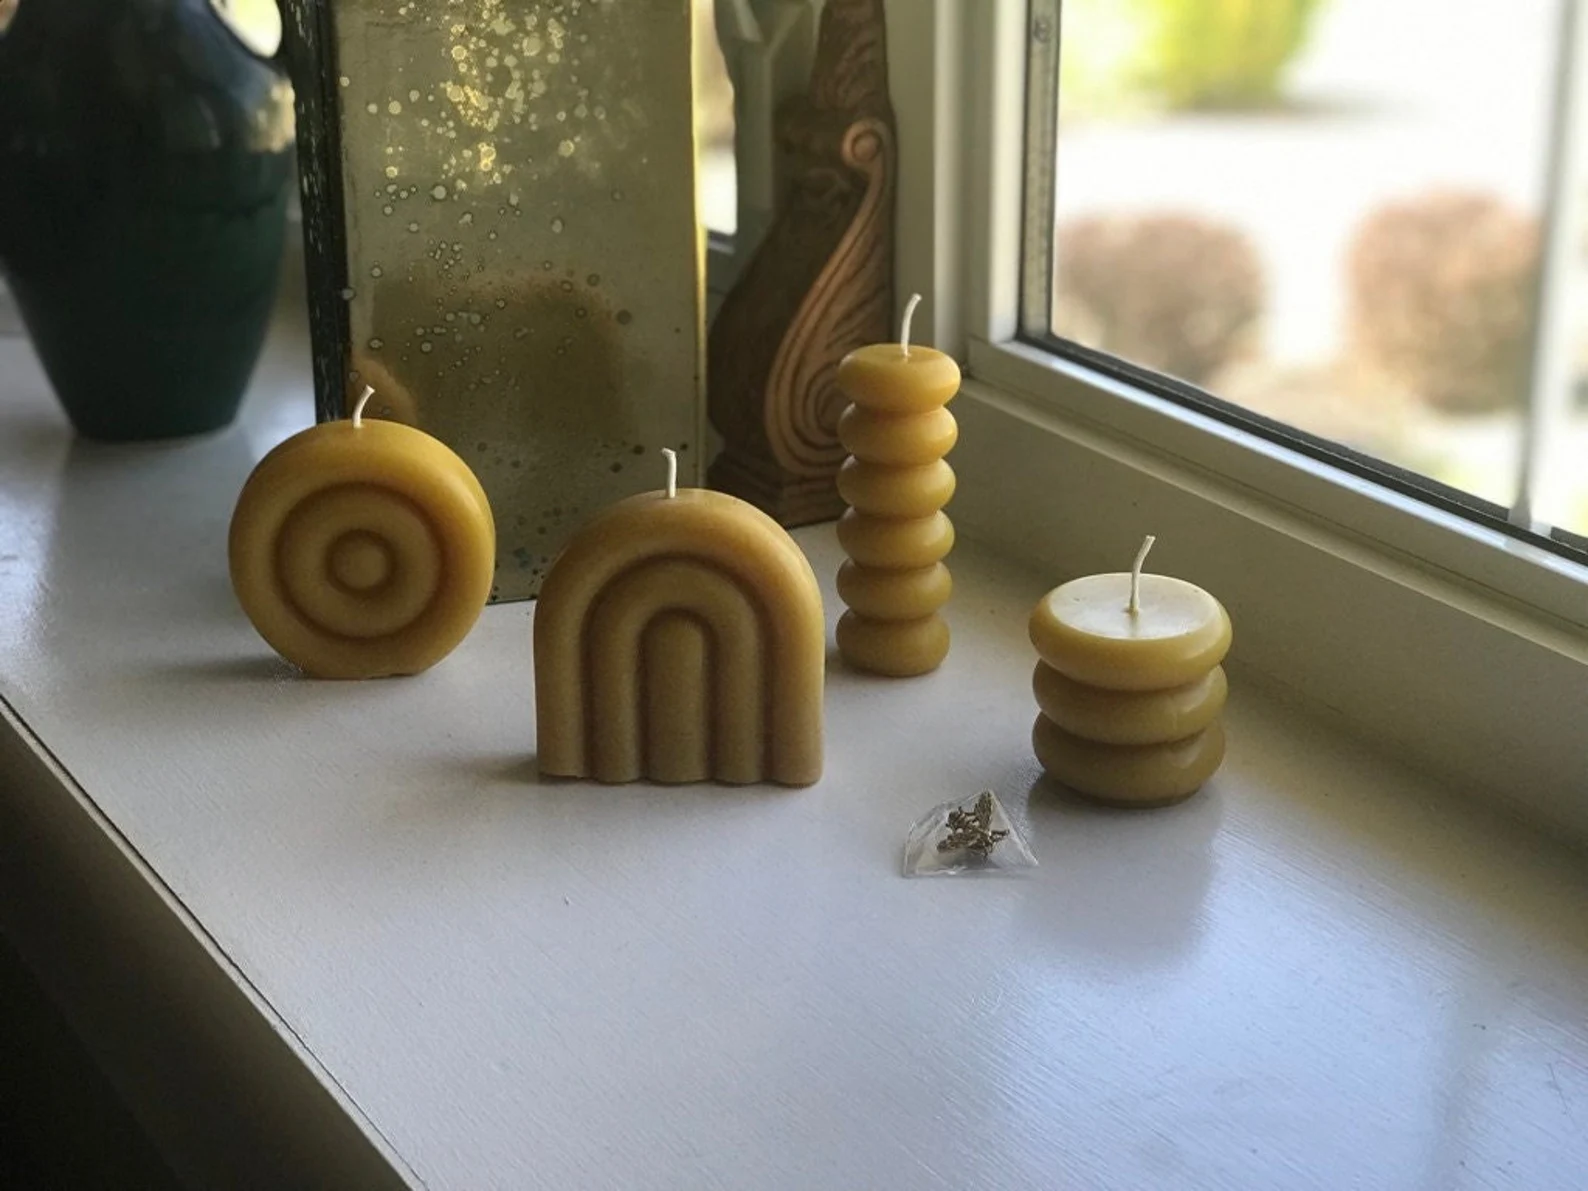 Christmas Beeswax Candle Gift Box – Bees Light Candles